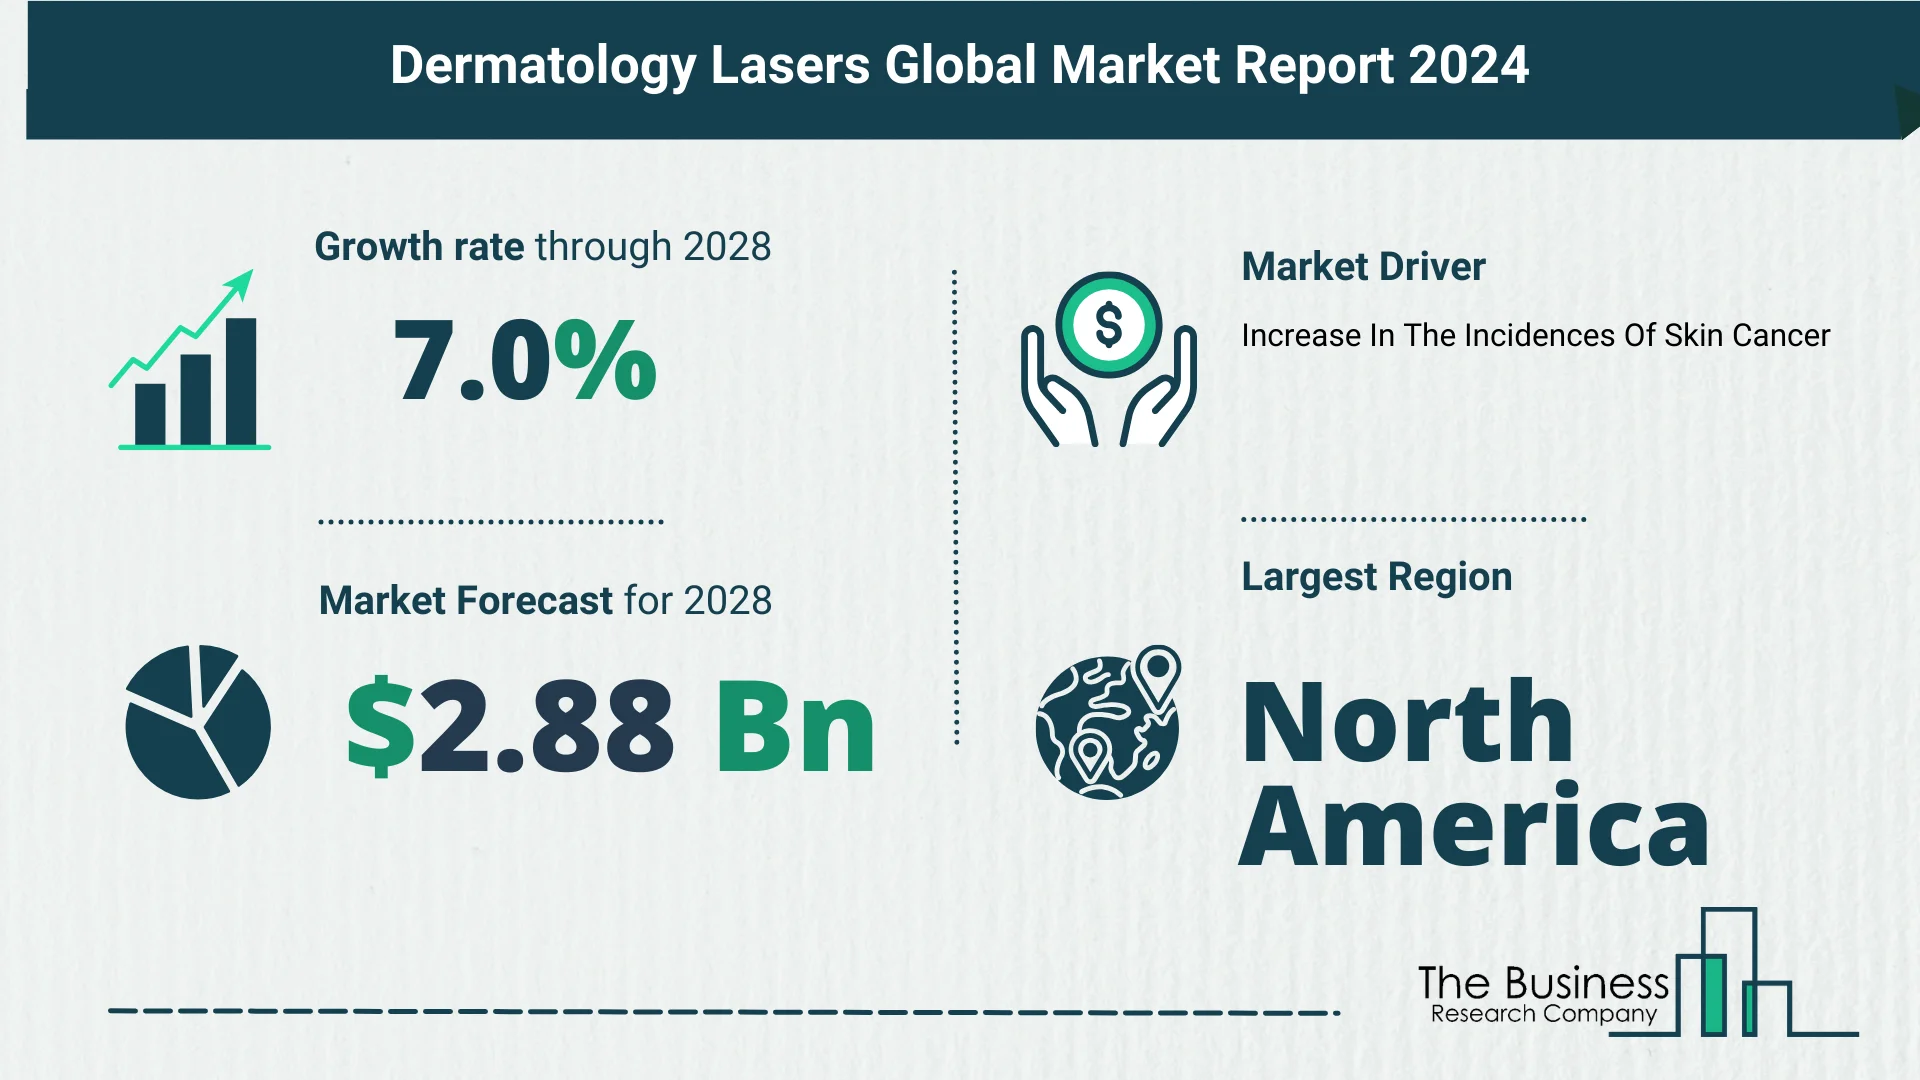 Global Dermatology Lasers Market Analysis 2024: Size, Share, And Key Trends